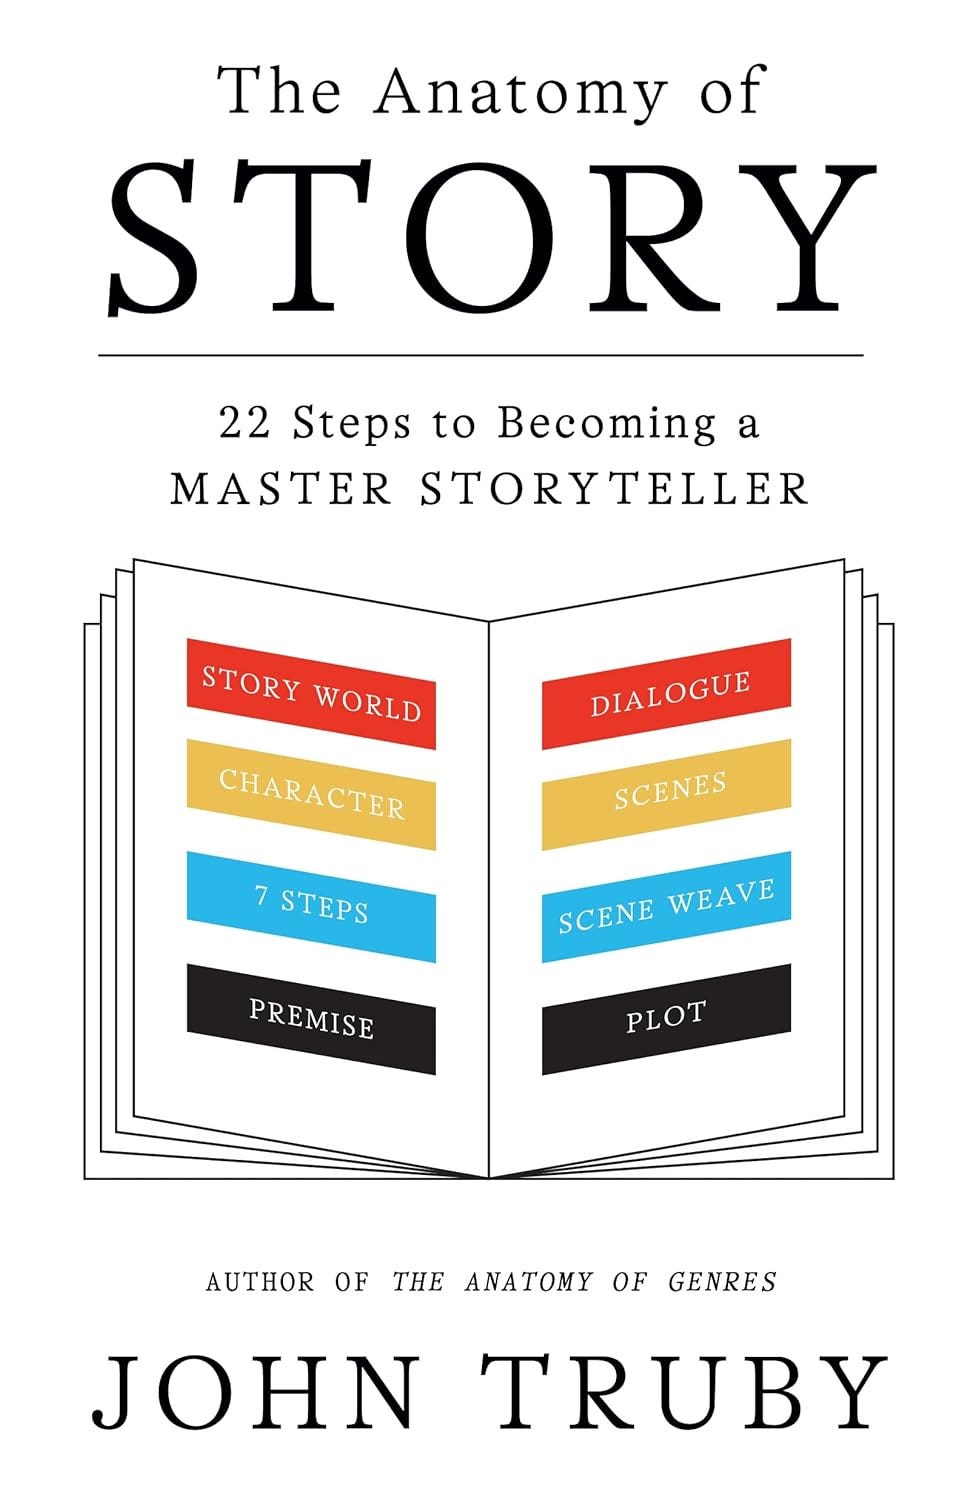 A picture of the cover of John Truby's "The Anatomy of Story."